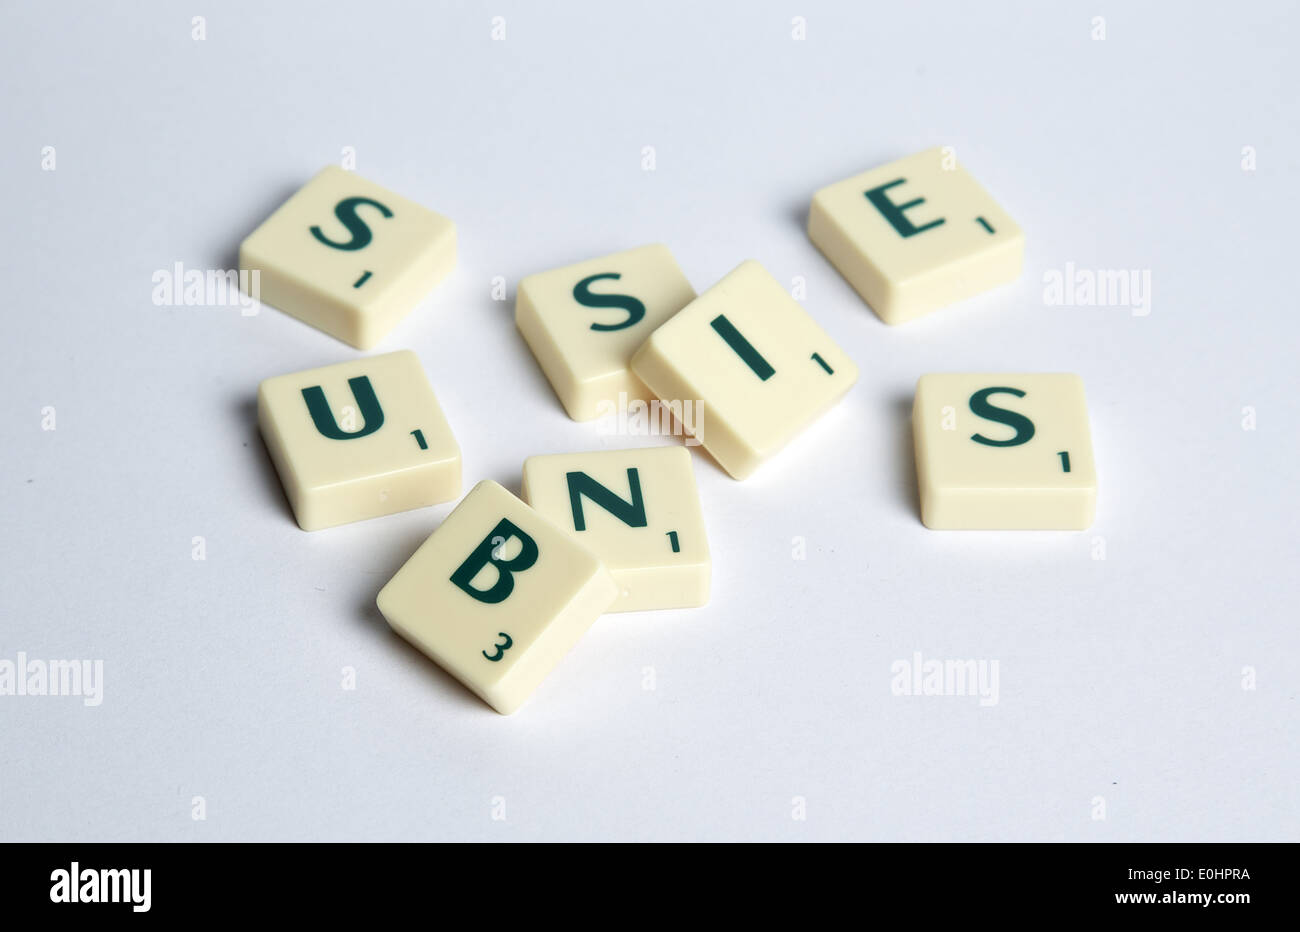 a jumbled collection of scrabble letters making up the word business Stock Photo